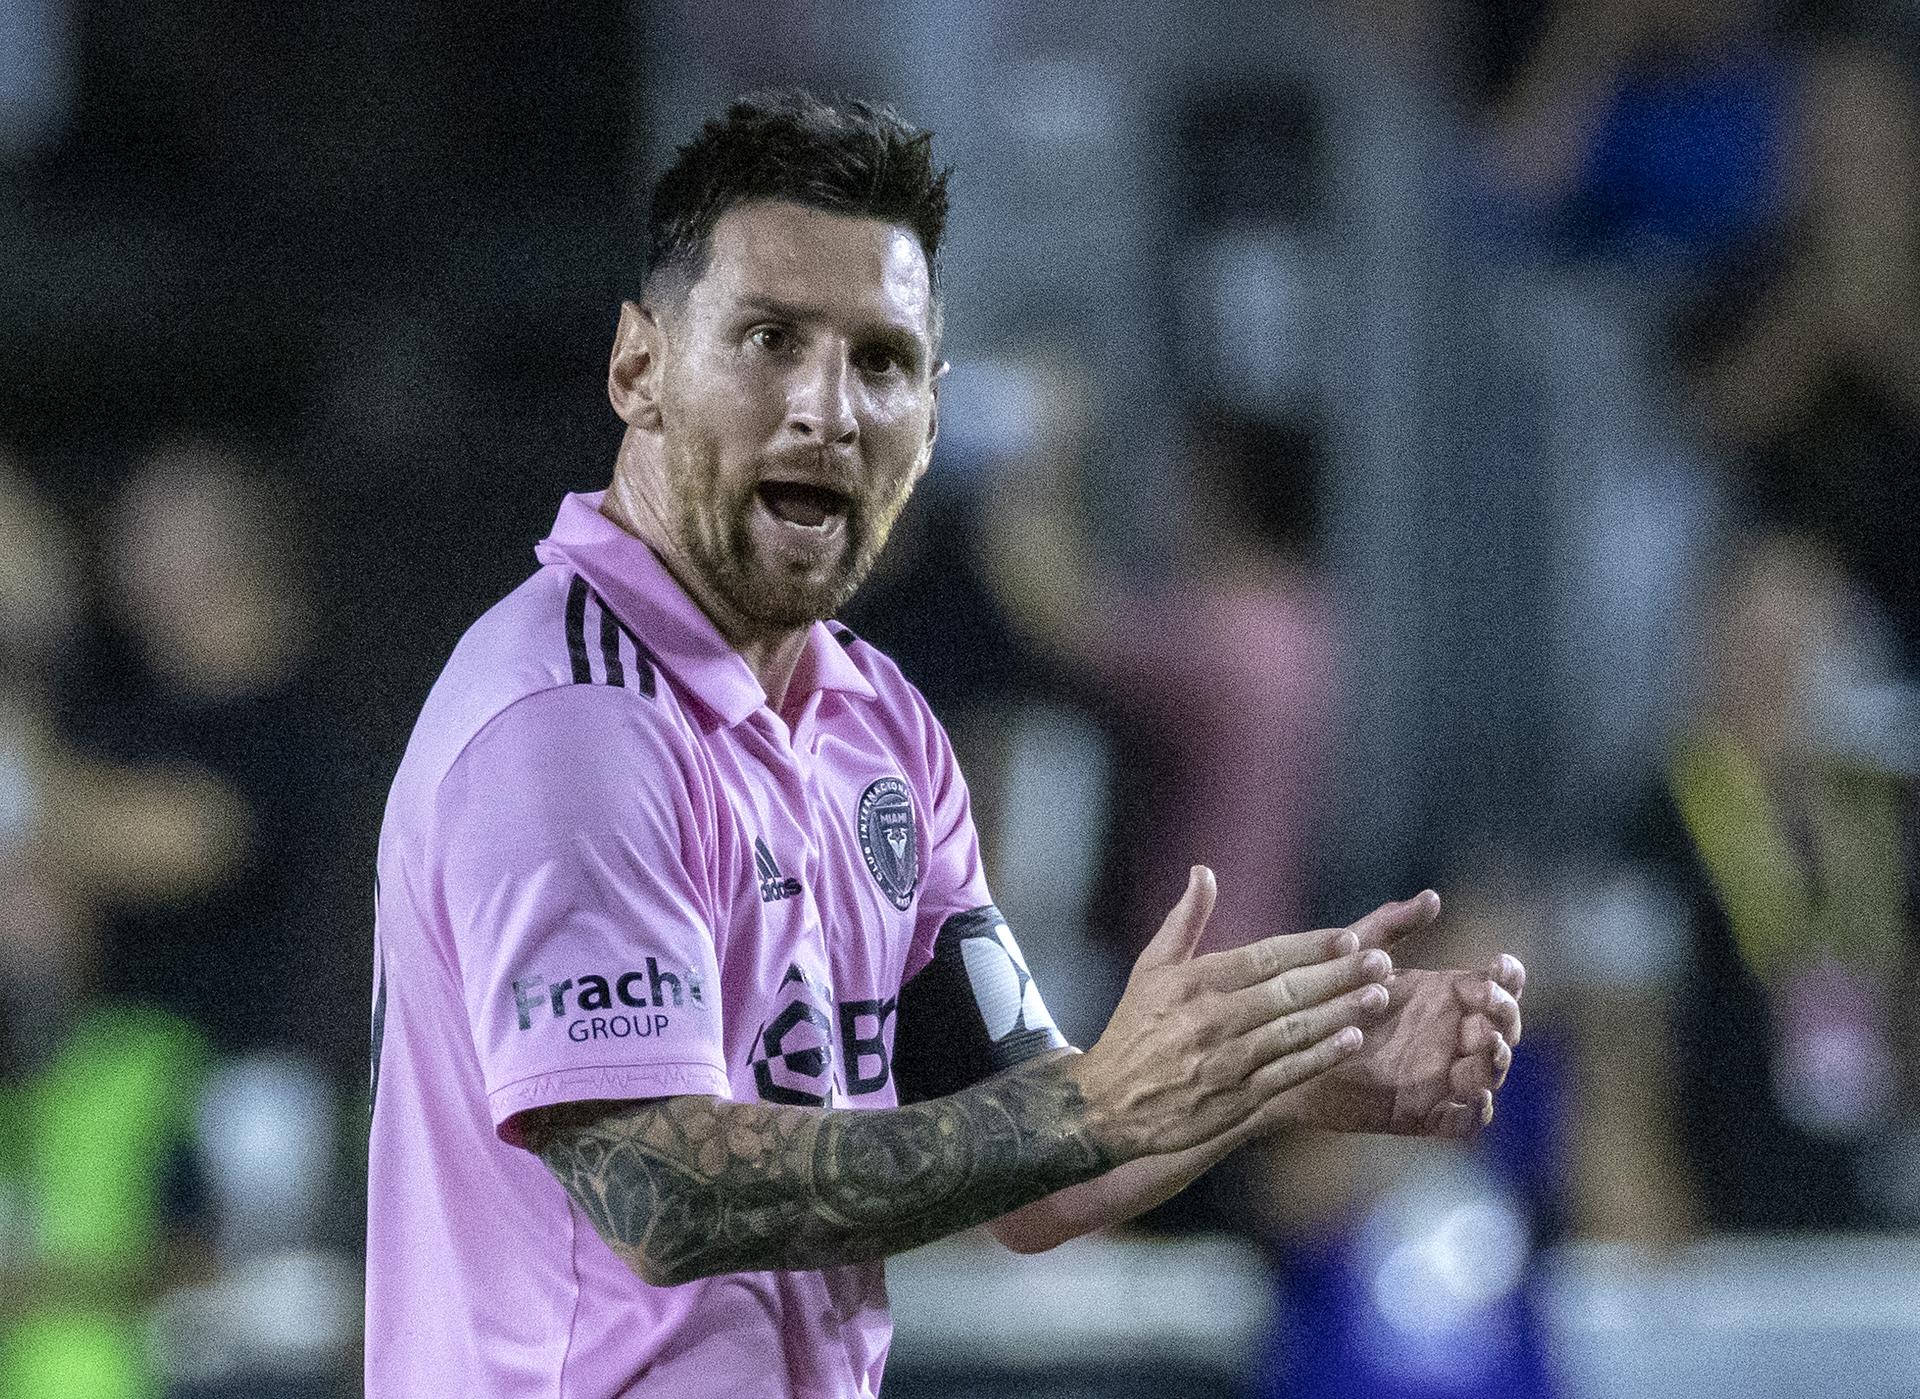 Inter Miami CF player Argentine Lionel Messi celebrates his goal during the Soccer Leagues Cup match between Cruz Azul and Inter Miami CF at DRV PNK Stadium in Fort Lauderdale, Florida, US, 21 July 2023. EFE-EPA/CRISTOBAL HERRERA-ULASHKEVICH